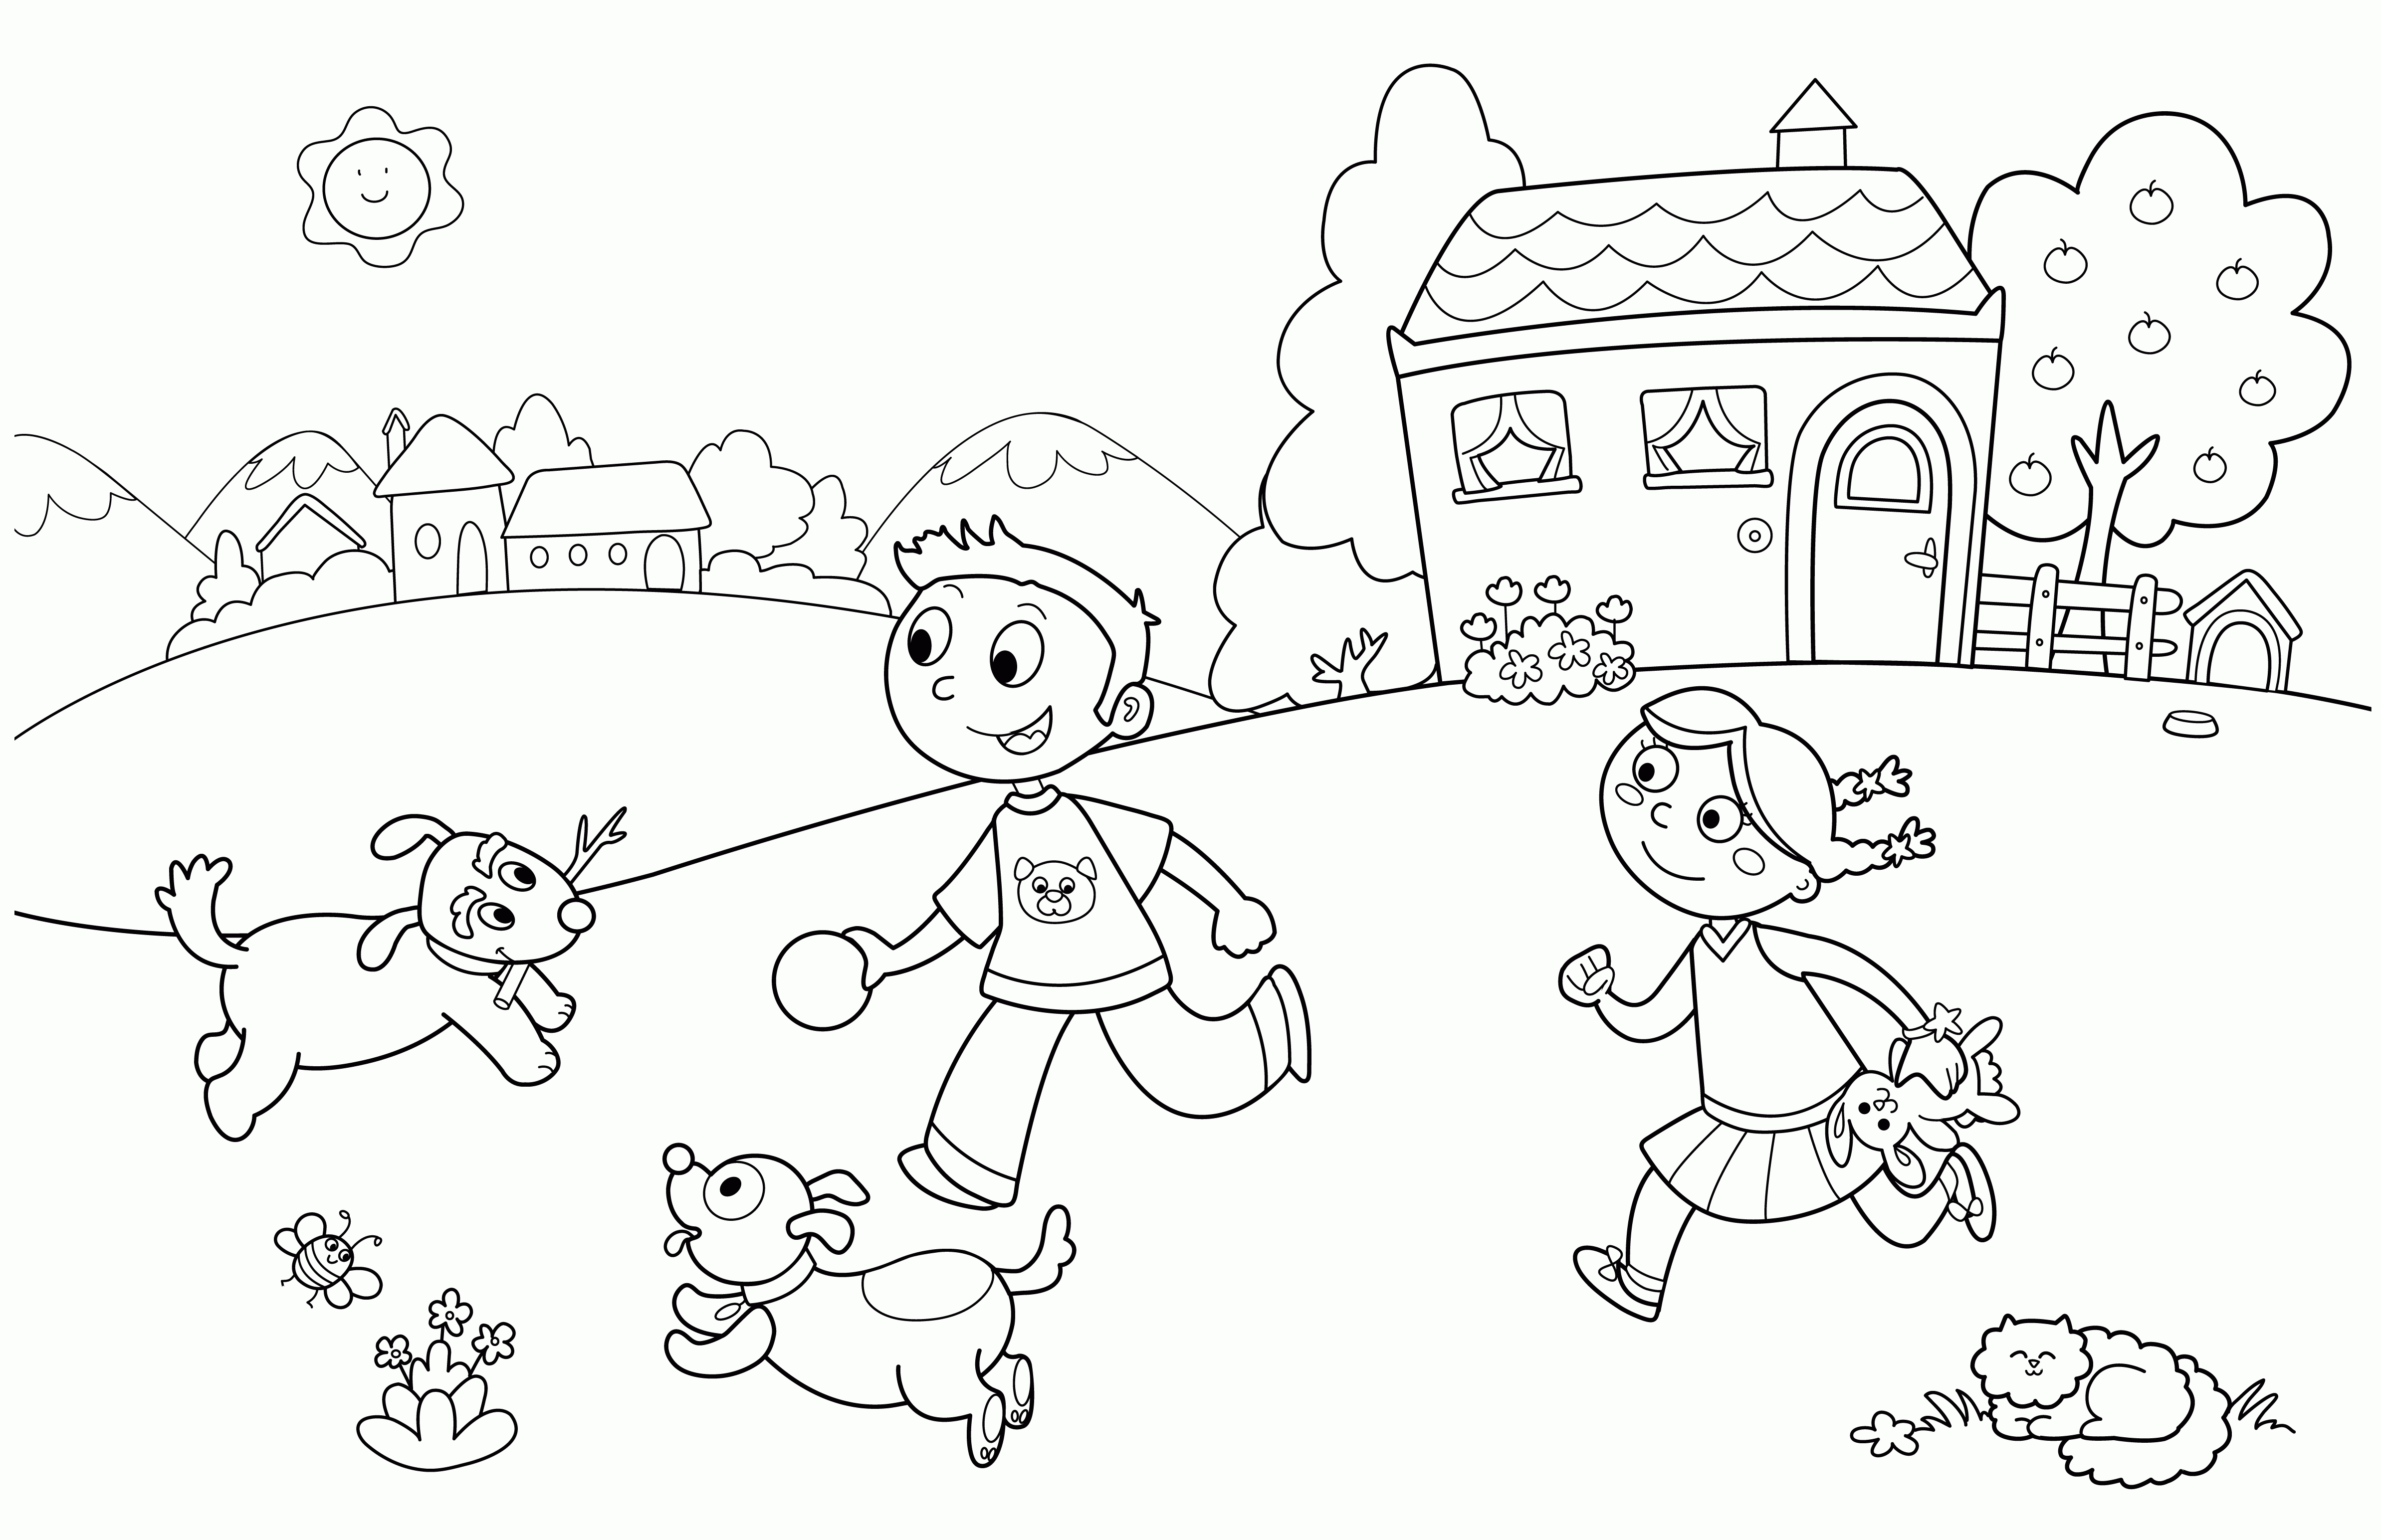 18 Free Pictures for: Summer Coloring Pages. Temoon.us